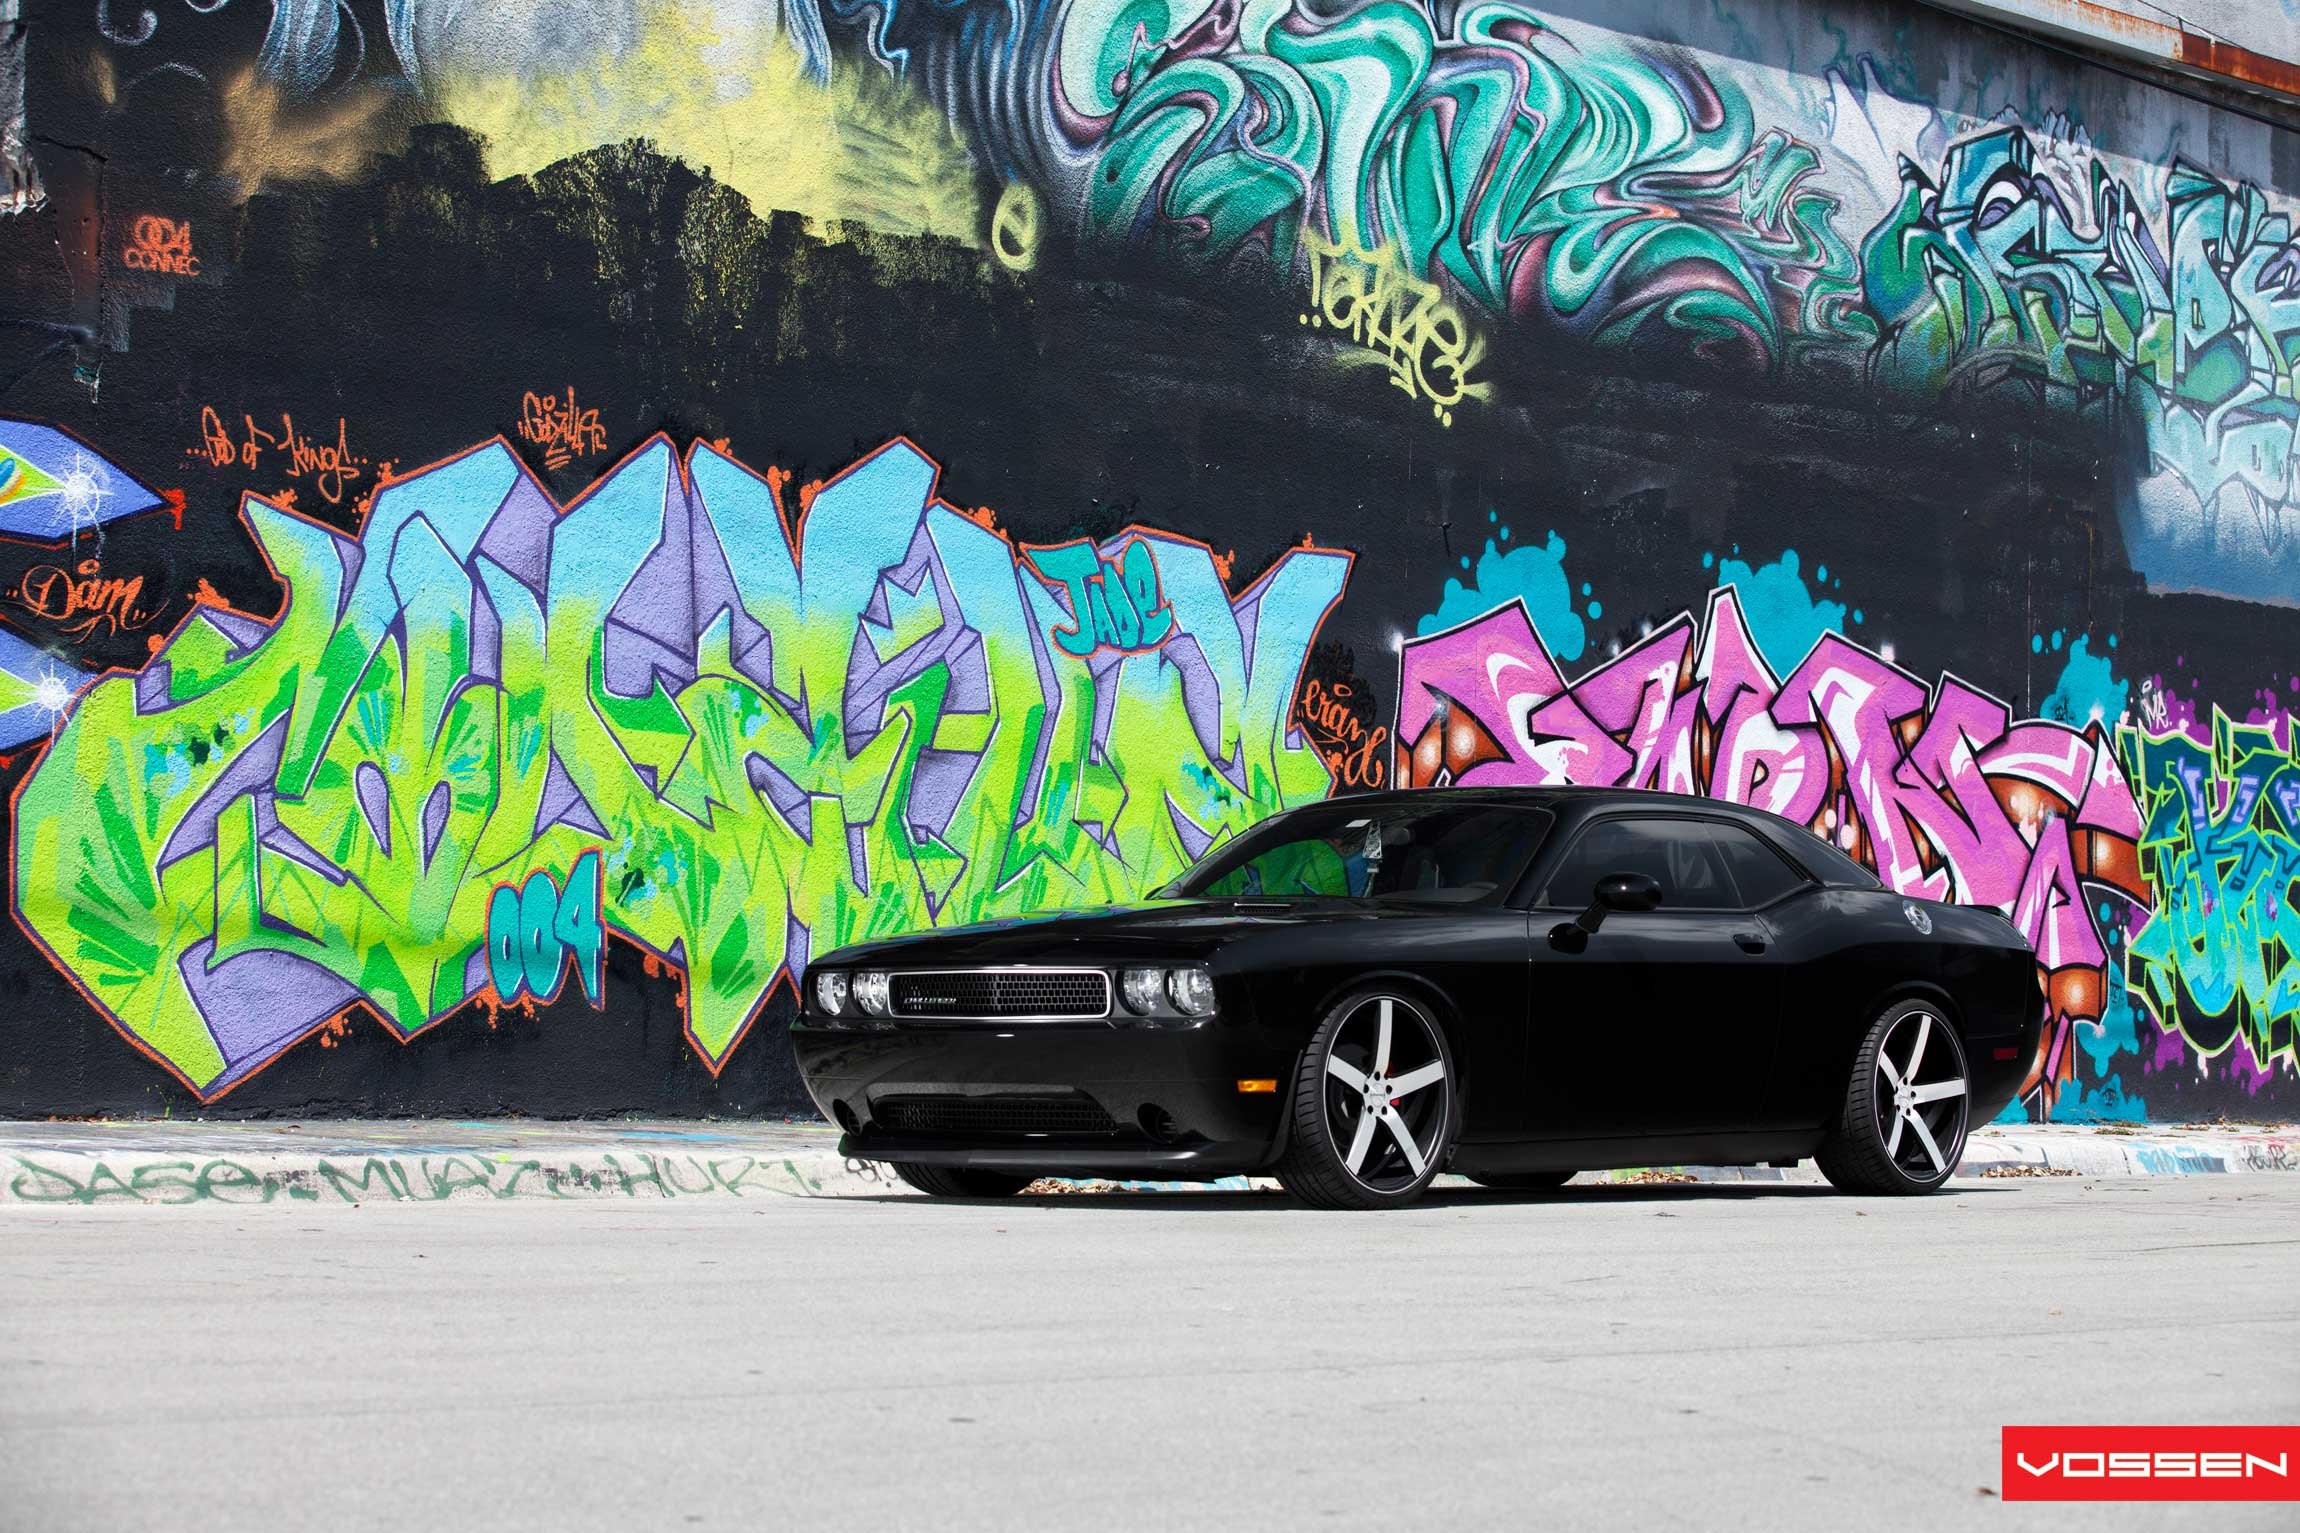 Crystal Clear LED Headlights on Black Dodge Challenger - Photo by Vossen